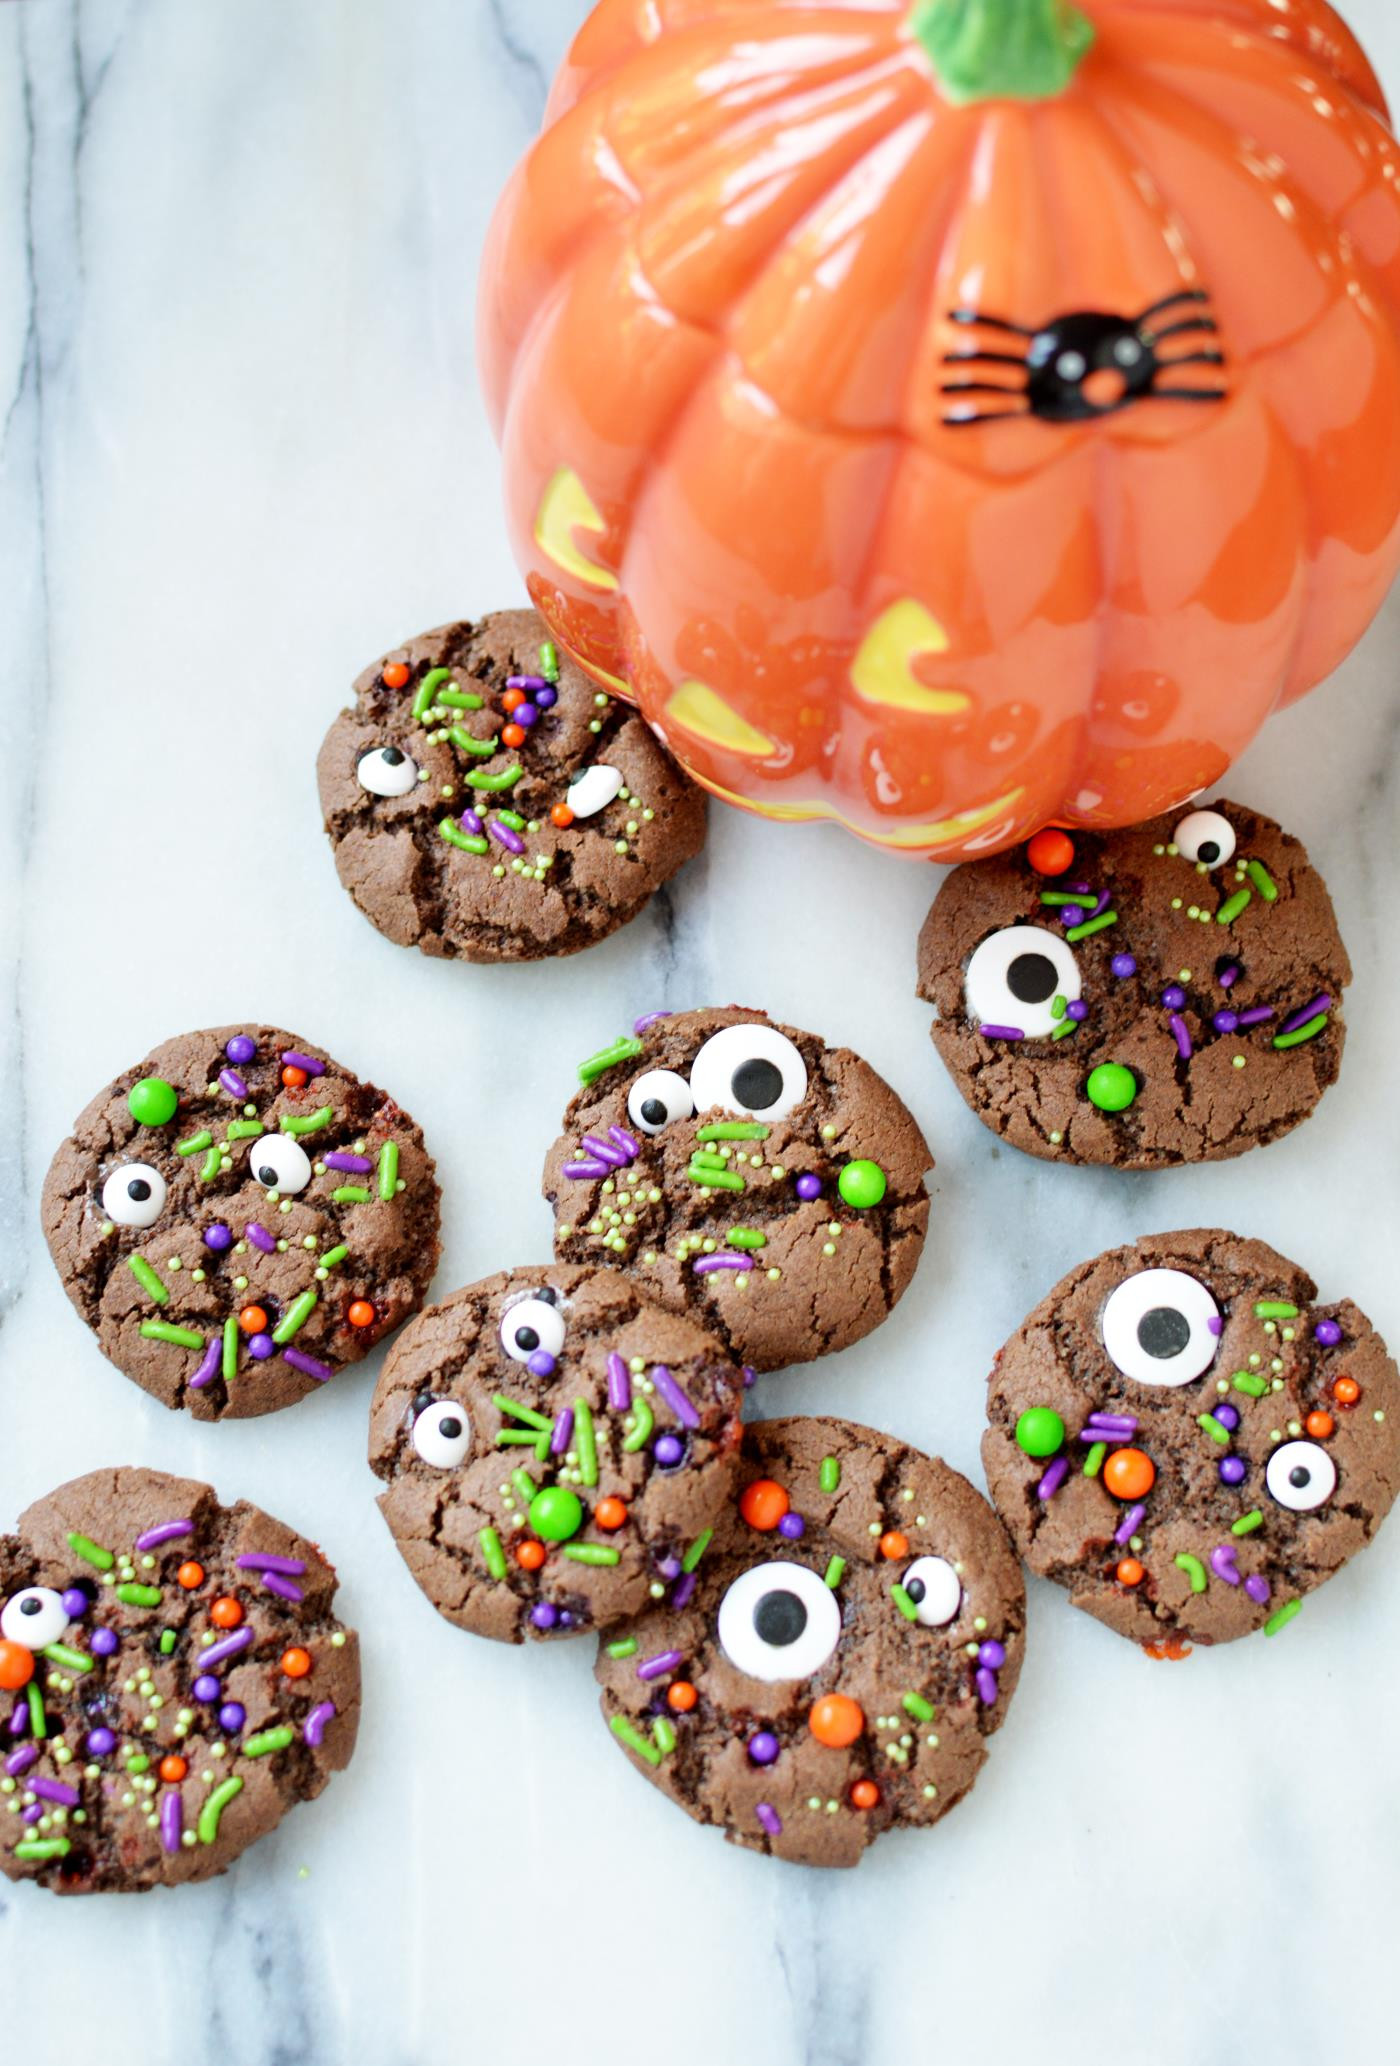 Halloween Monster Cookies
 Make These Adorable Halloween Monster Cookies From Scratch